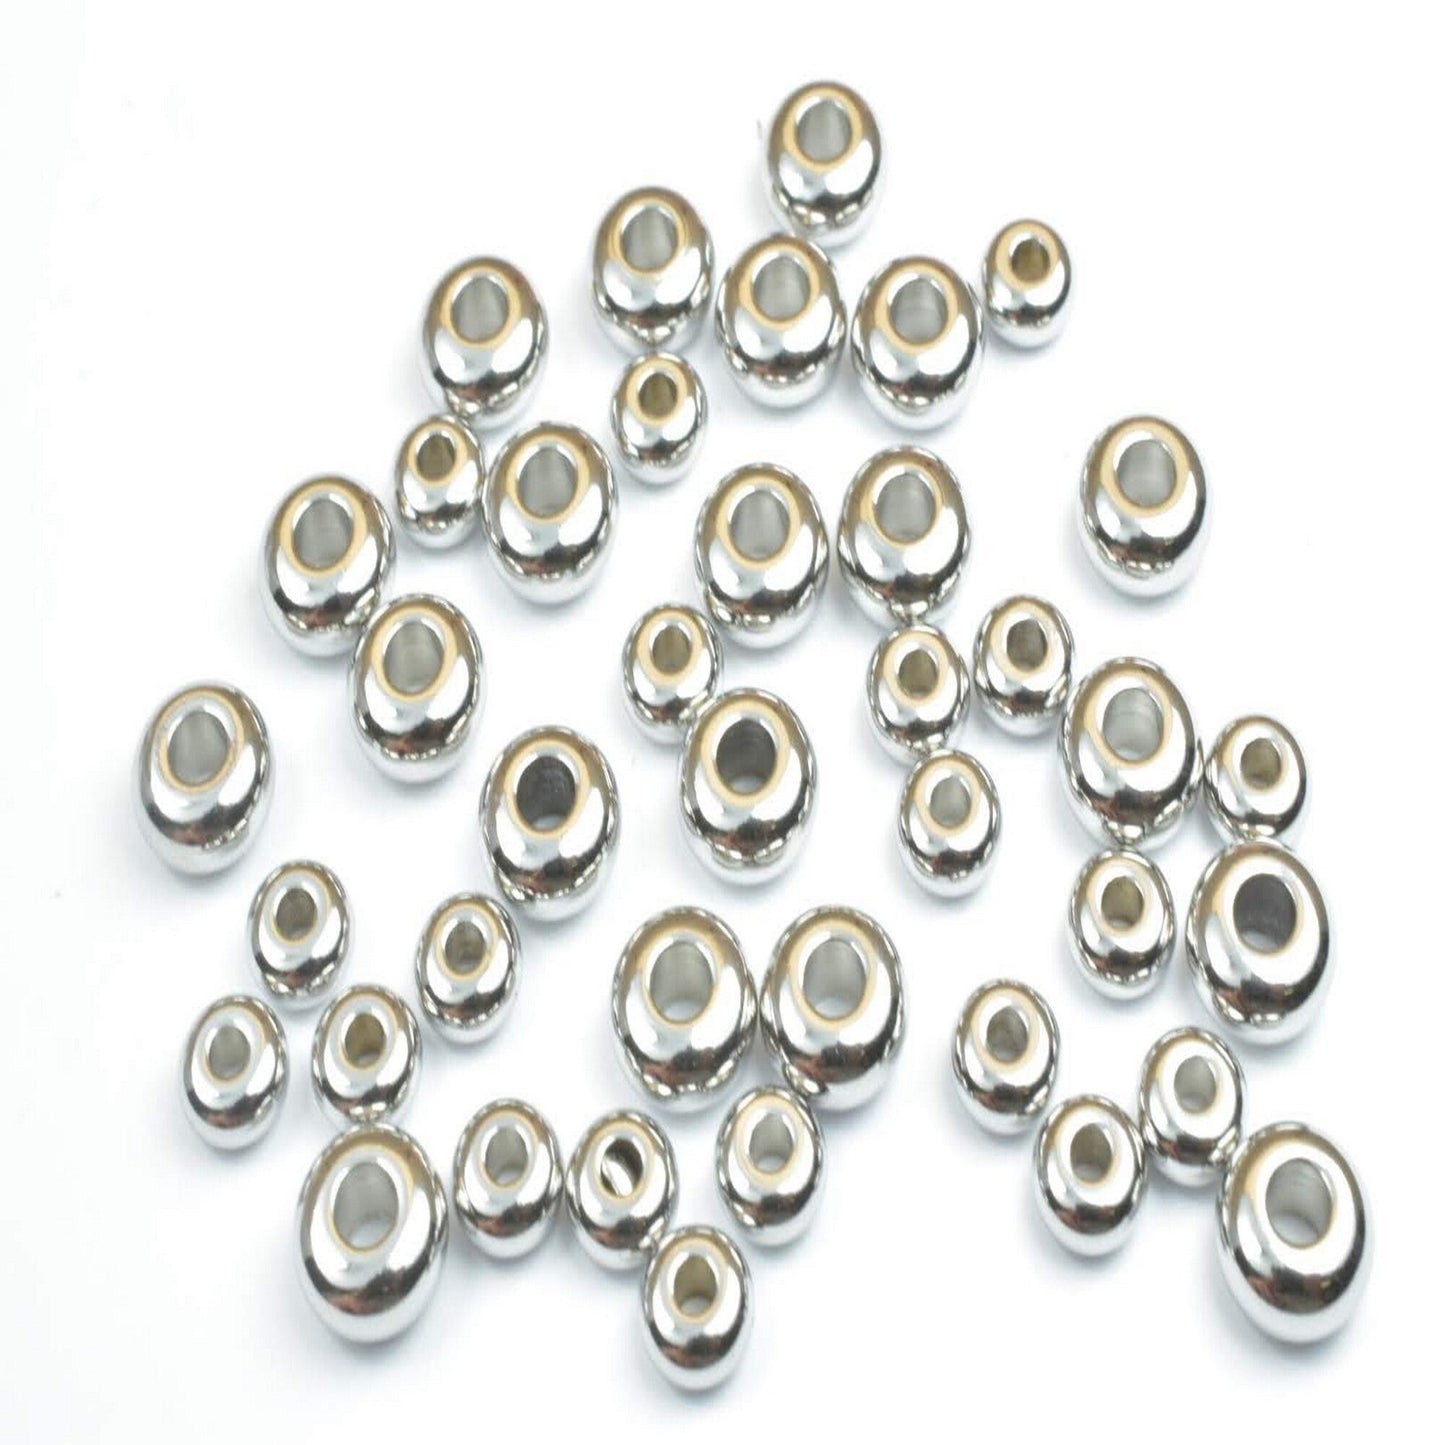 Stainless Steel Rondel Plain Spacer Beads Size 6x3mm, 8x4mm Jewelry Finding Supply For Jewelry Making